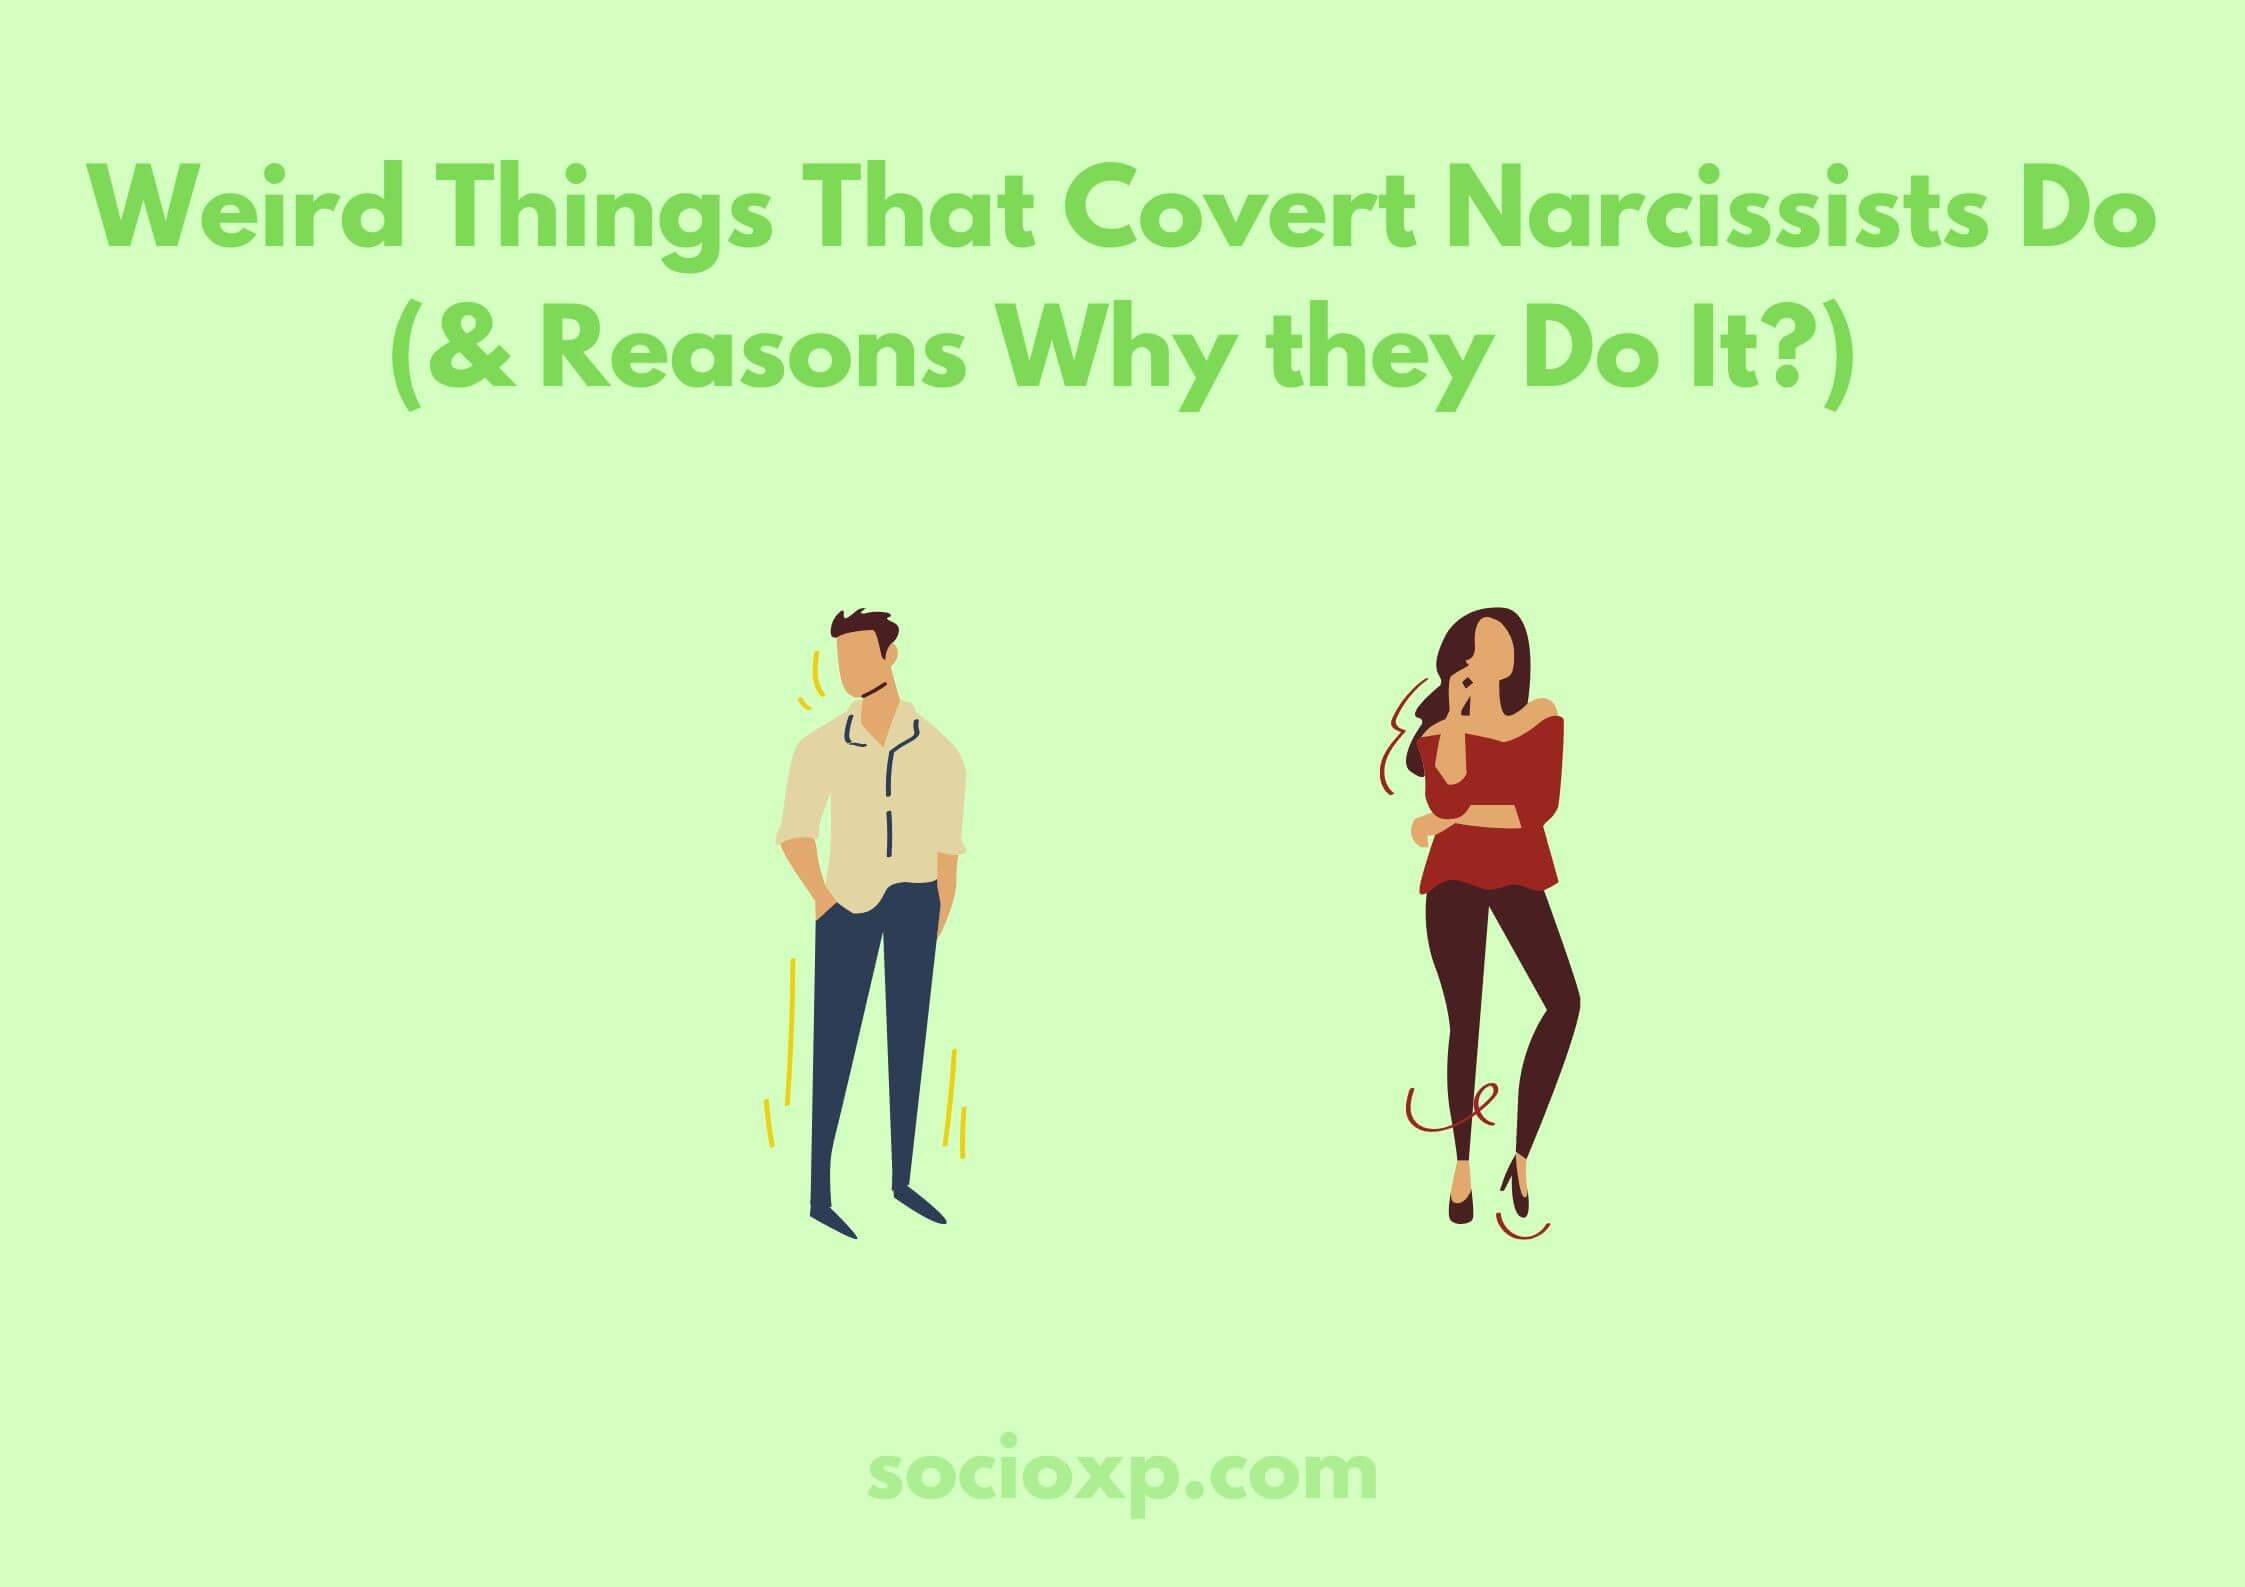 Weird Things That Covert Narcissists Do (& Reasons Why they Do It?)